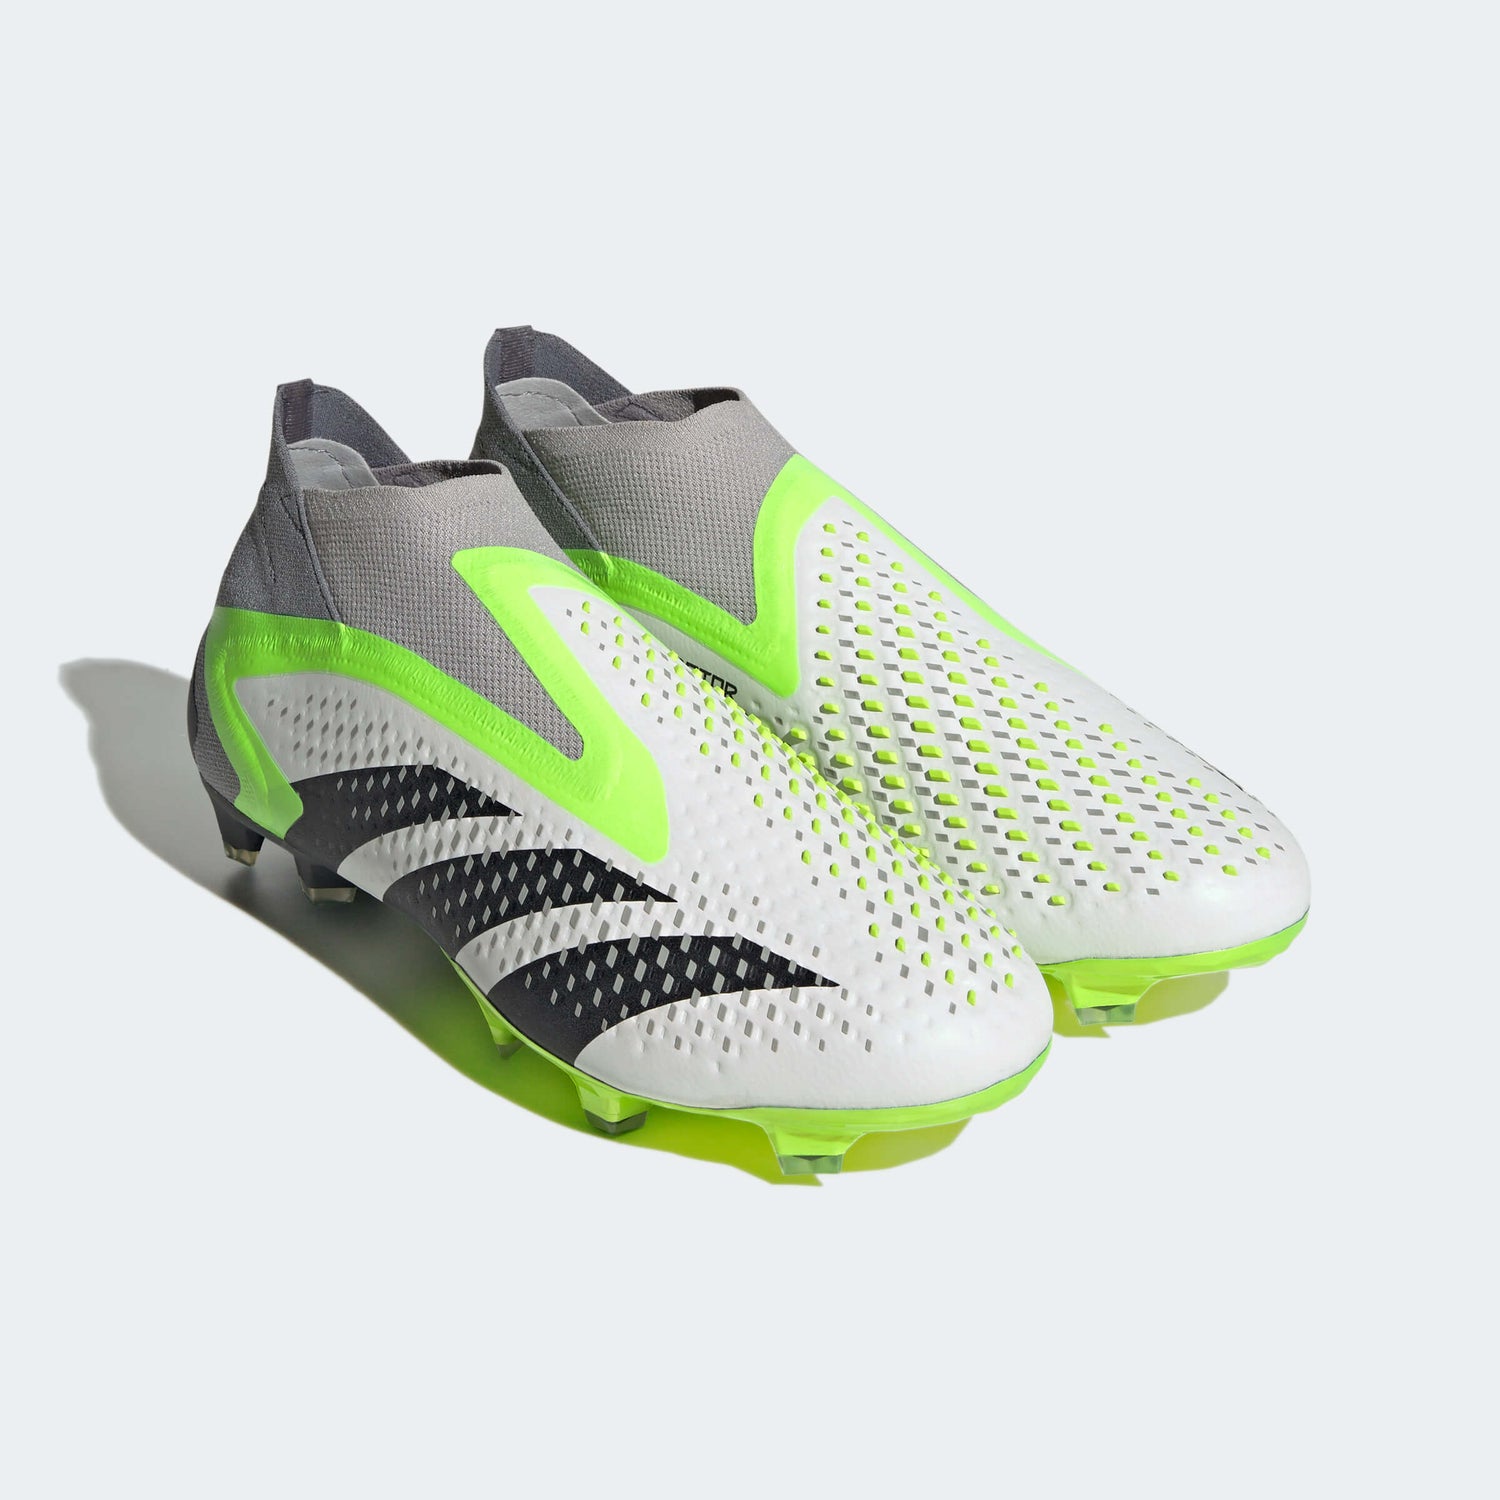 adidas Predator Accuracy + FG - Crazyrush Pack (FA23) (Pair - Lateral Front)